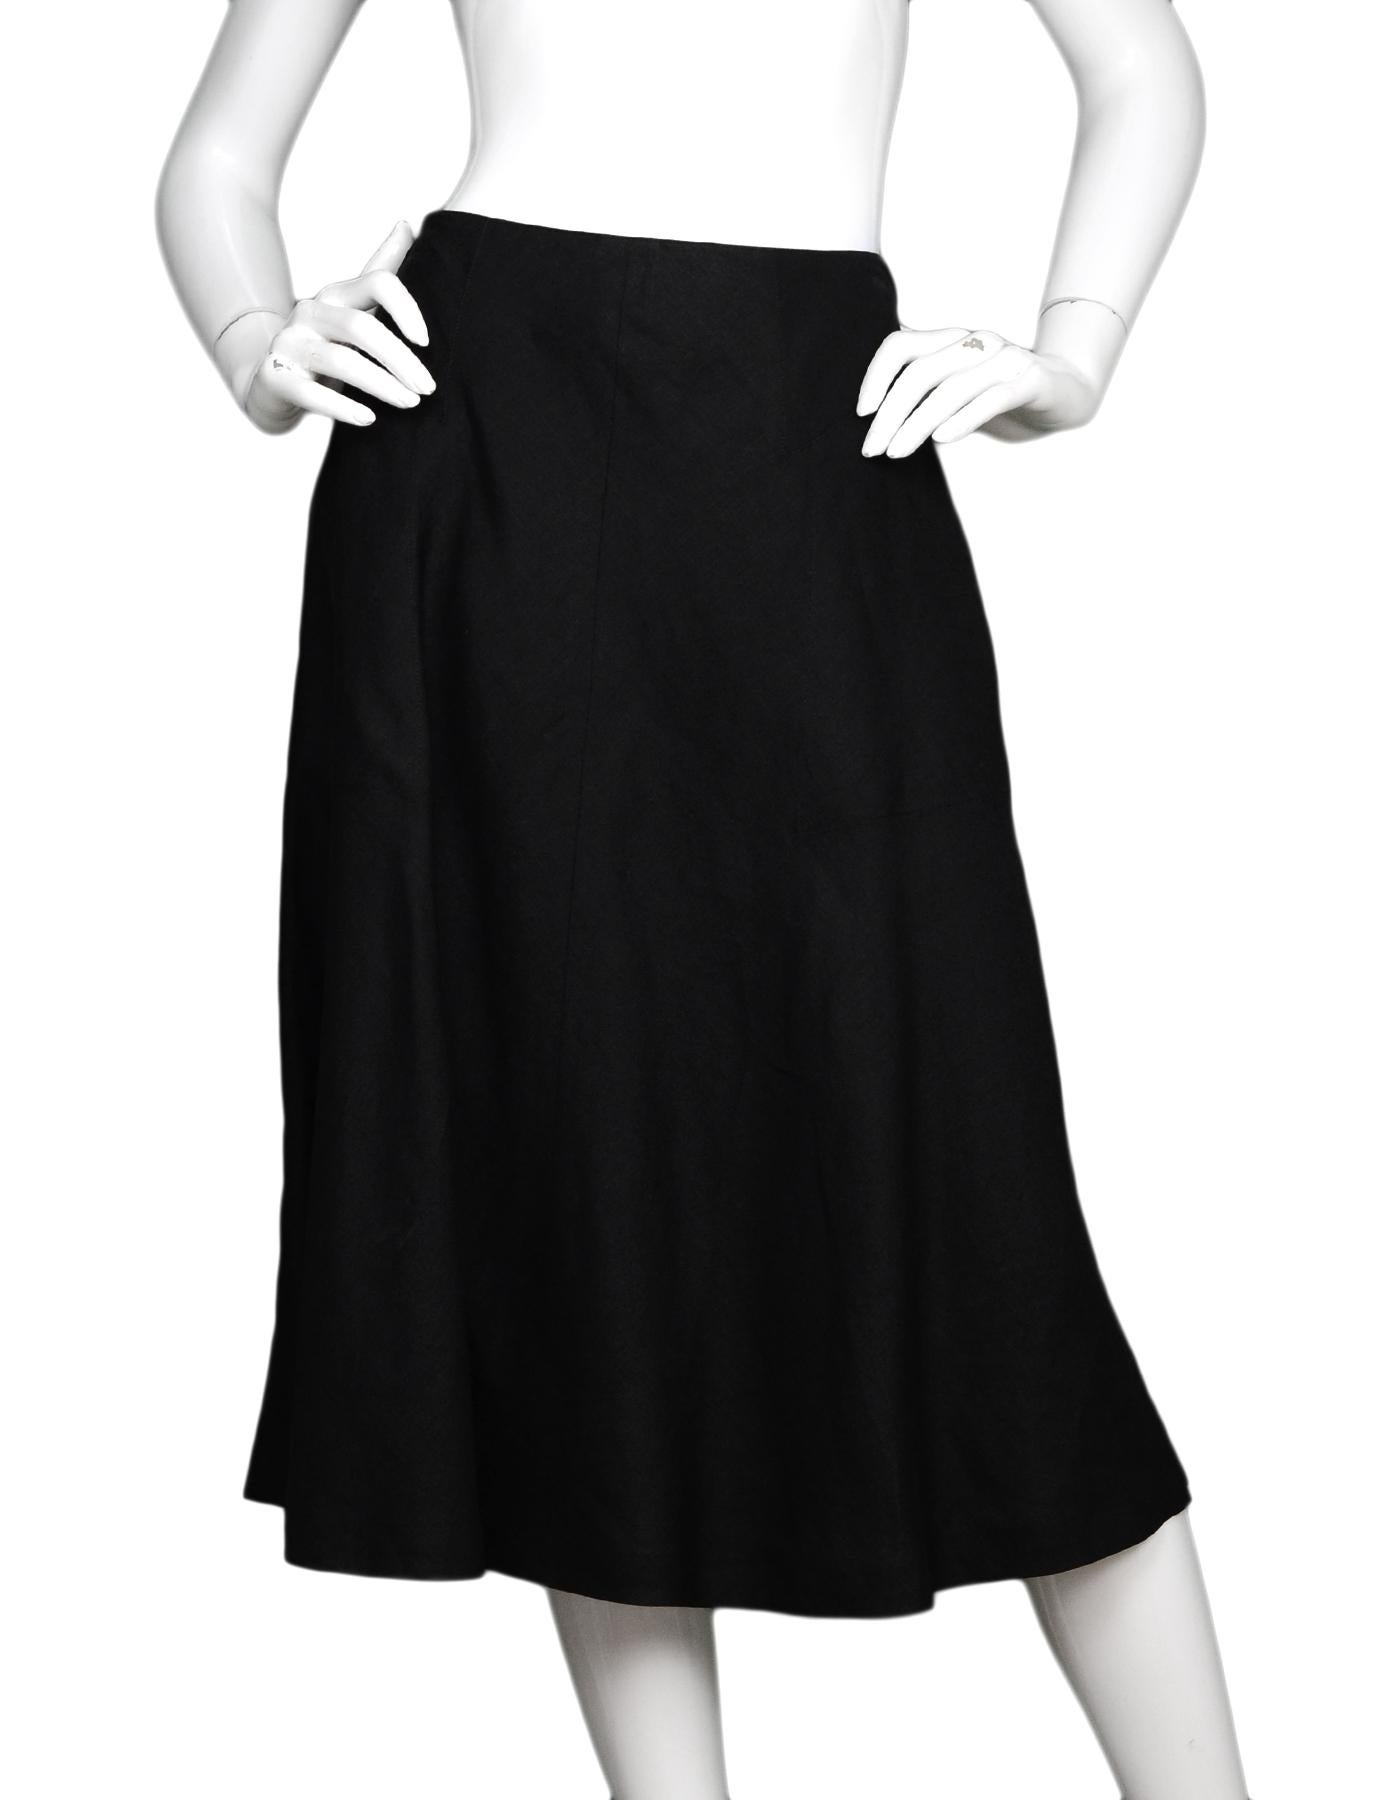 Hermes Black Linen A Line Skirt Sz 42

Made In: France
Color: Black
Materials: 100% linen 
Overall Condition: Excellent pre-owned condition 

Measurements: 
Waist: 30